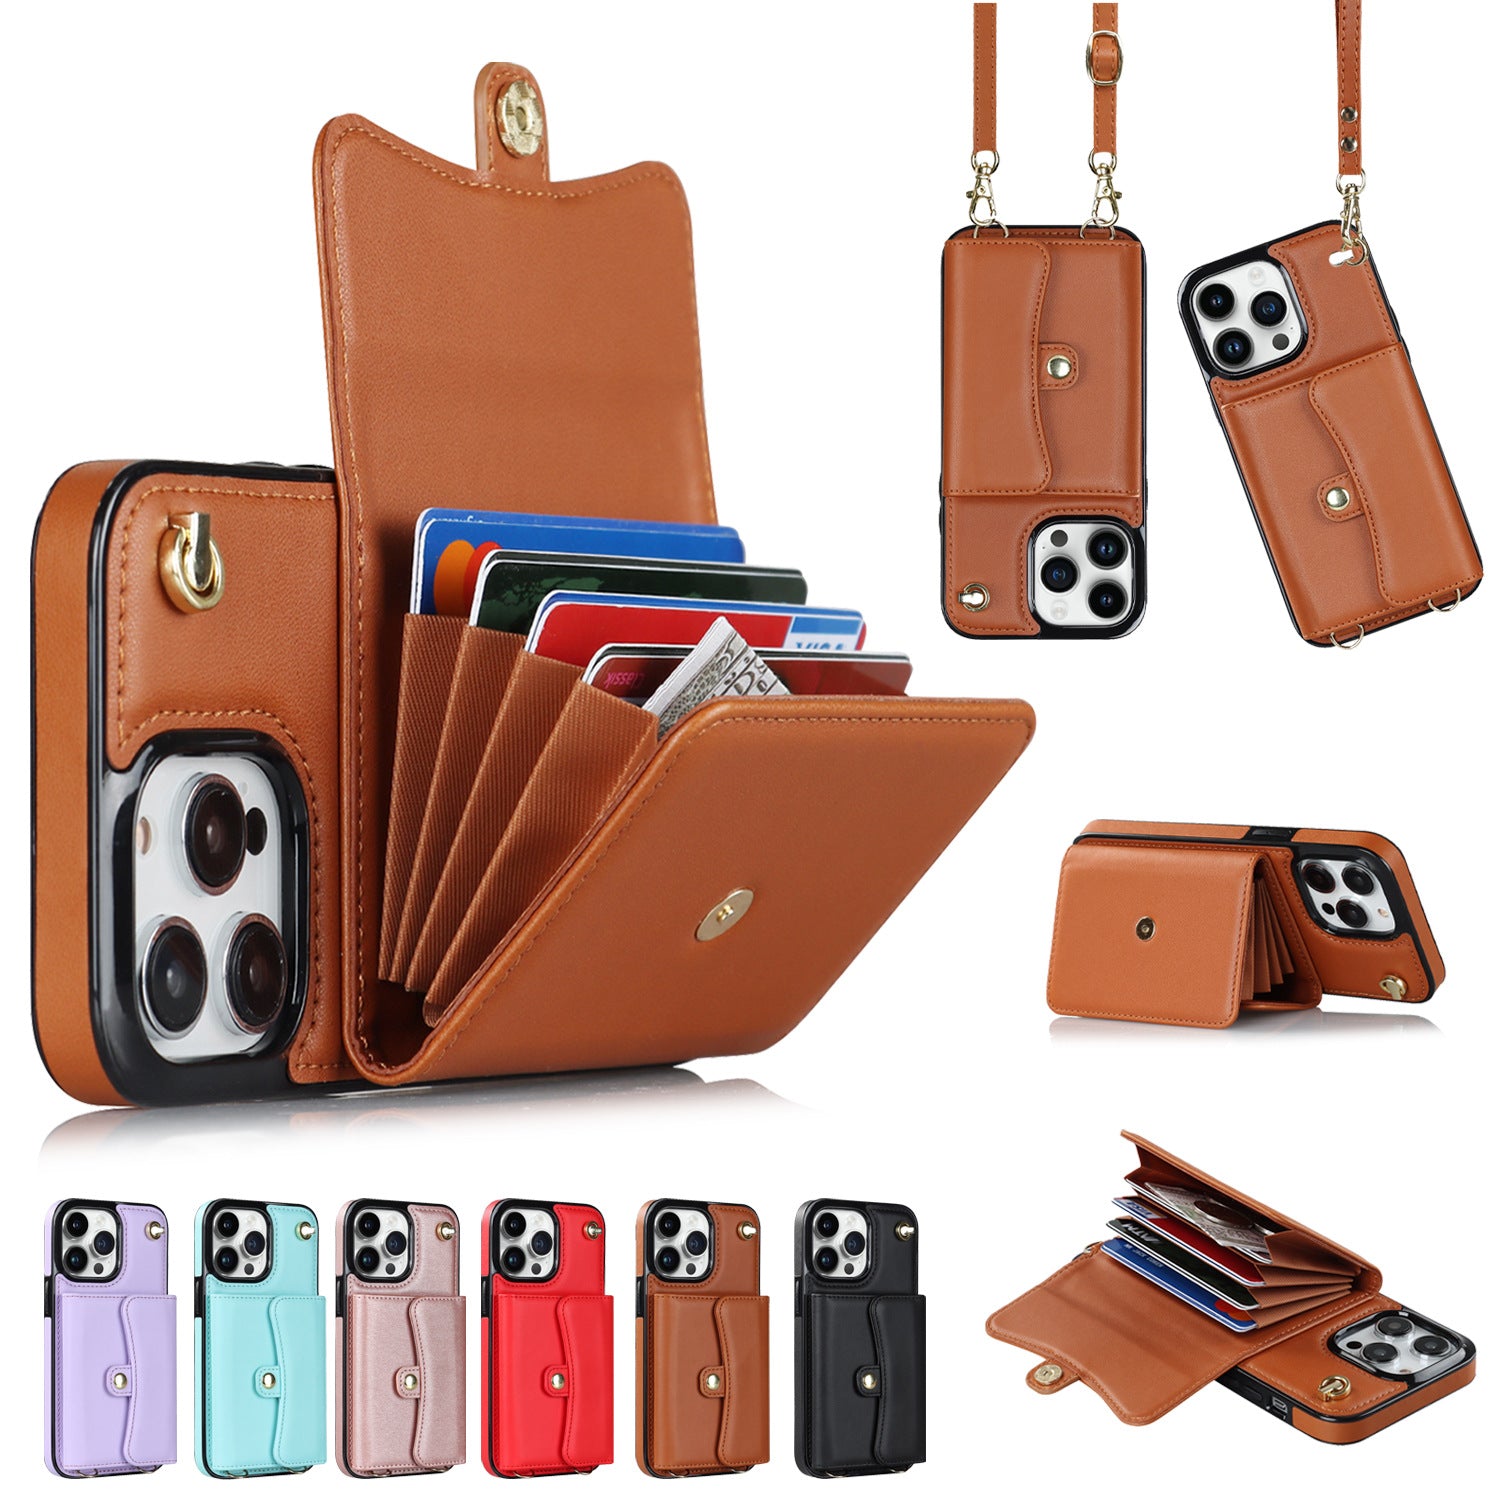 Crossbody iPhone leather case with card slots